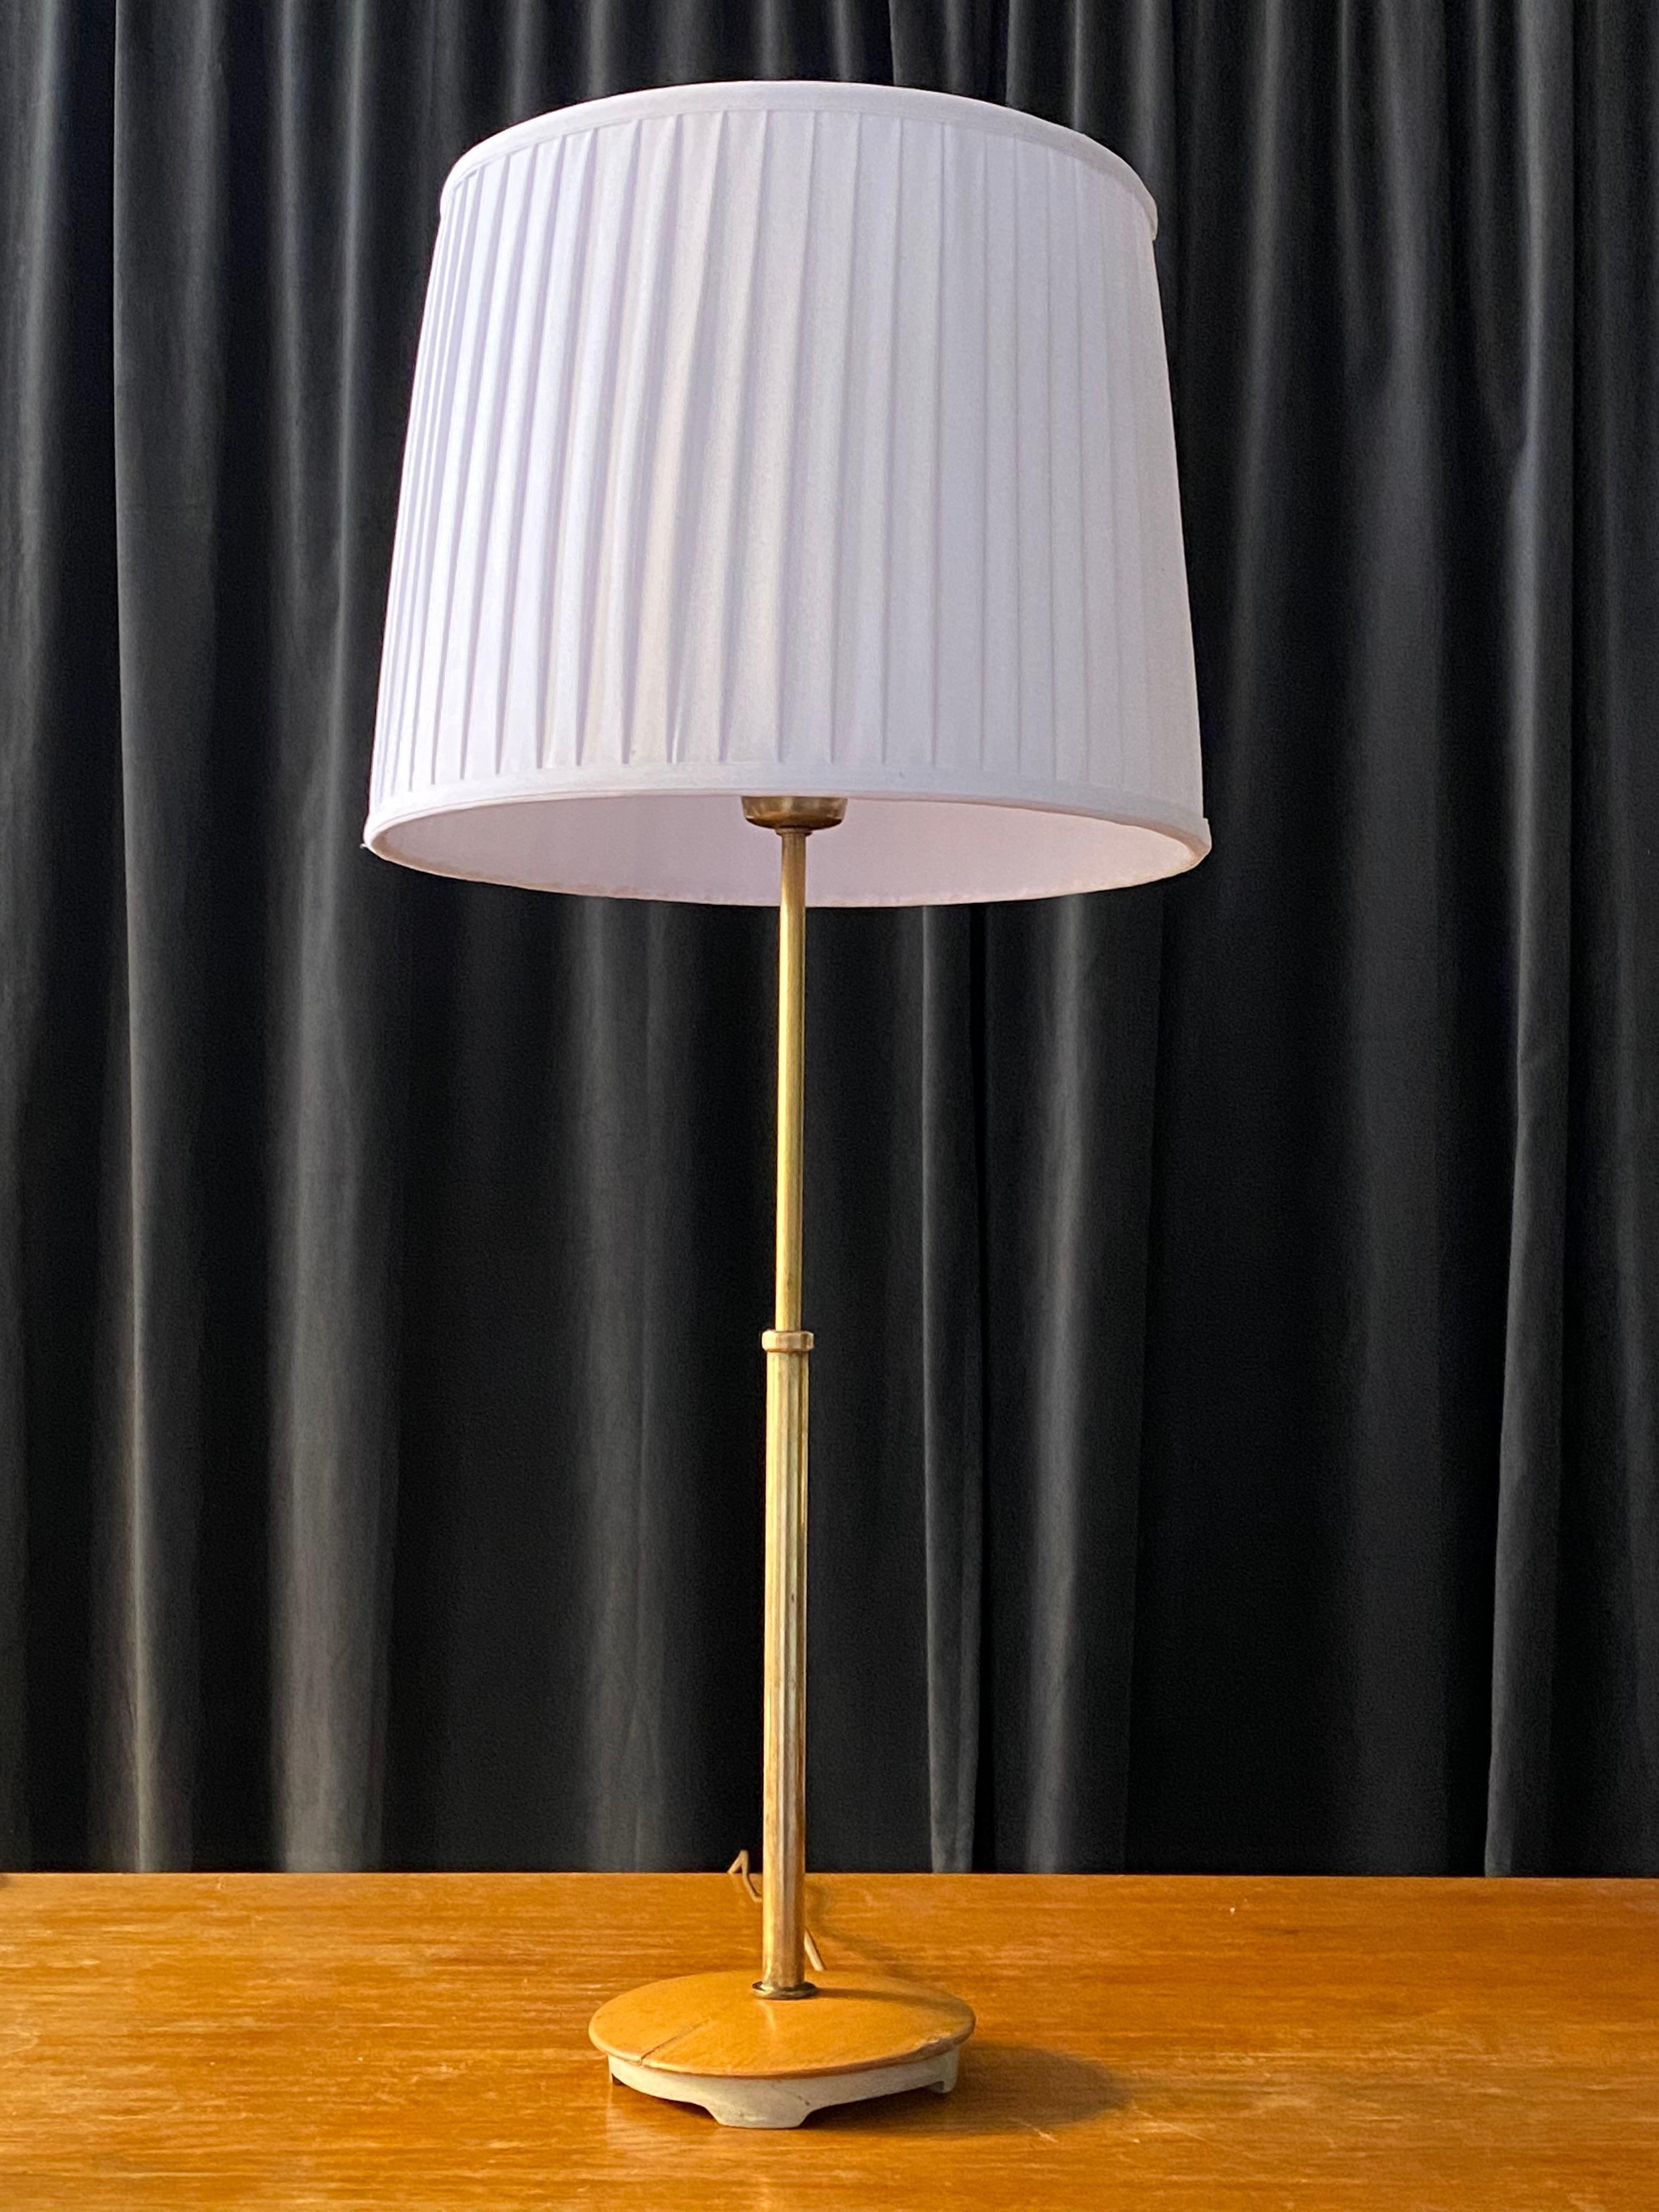 A functionalist table lamp, Designed by Bertil Brisborg produced by Nordiska Kompaniet in Sweden, 1940s. Adjustable, with current oversized shade, the height can be set from 55 cm / 21.65 in to 75 cm / 29.5 in.

In brass, base in grey painted iron